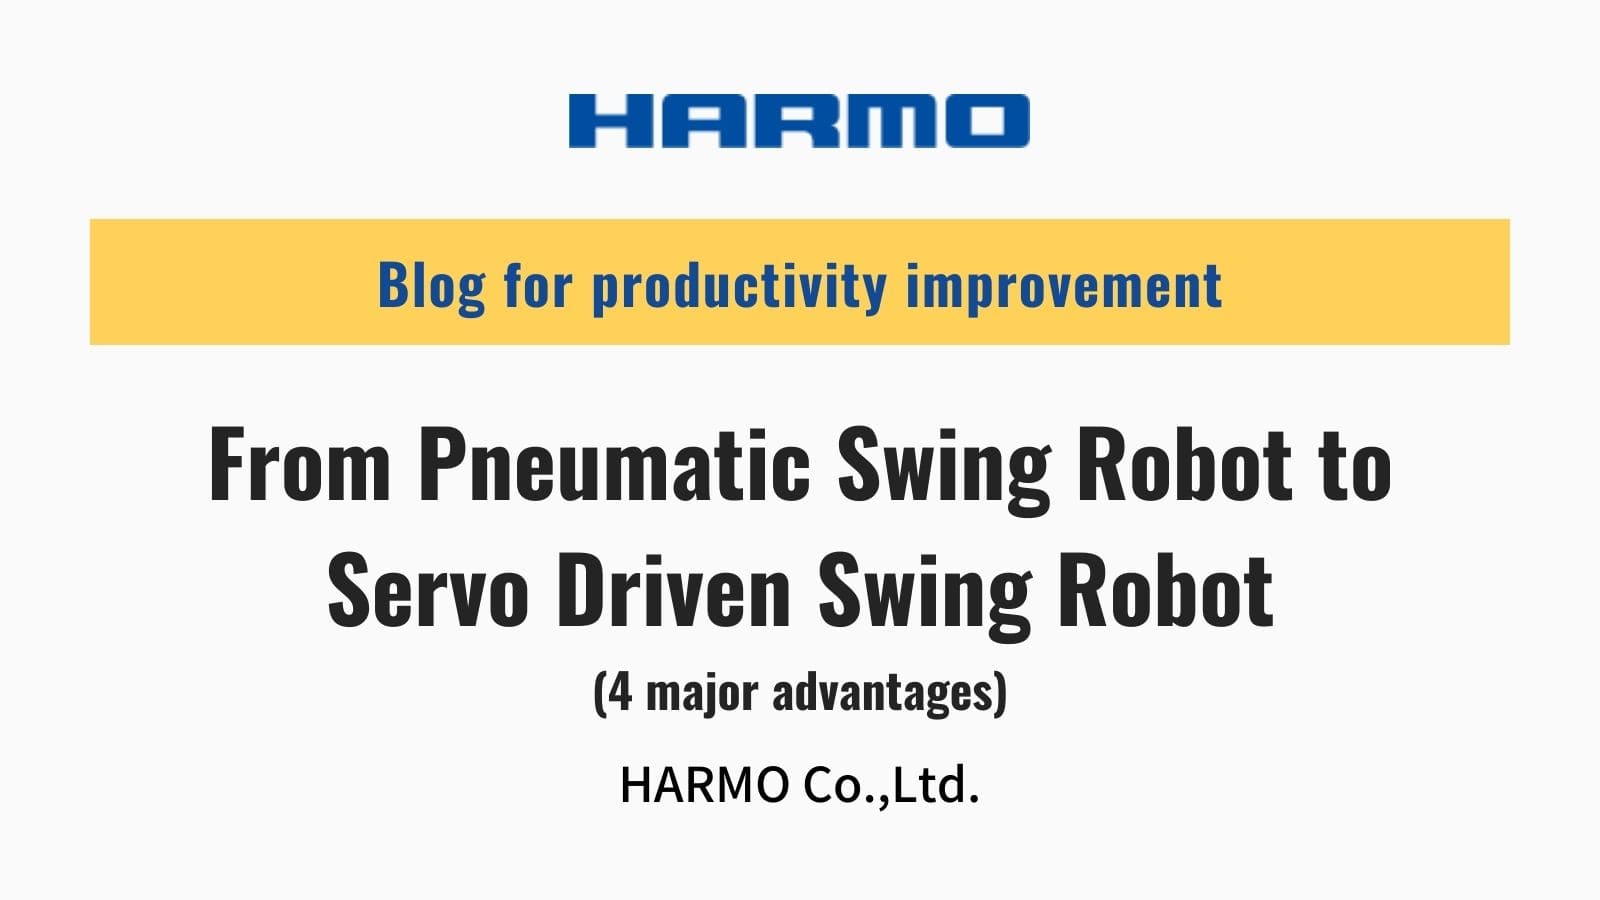 From Pneumatic Swing Robot to Servo Driven Swing Robot (4 major advantages)